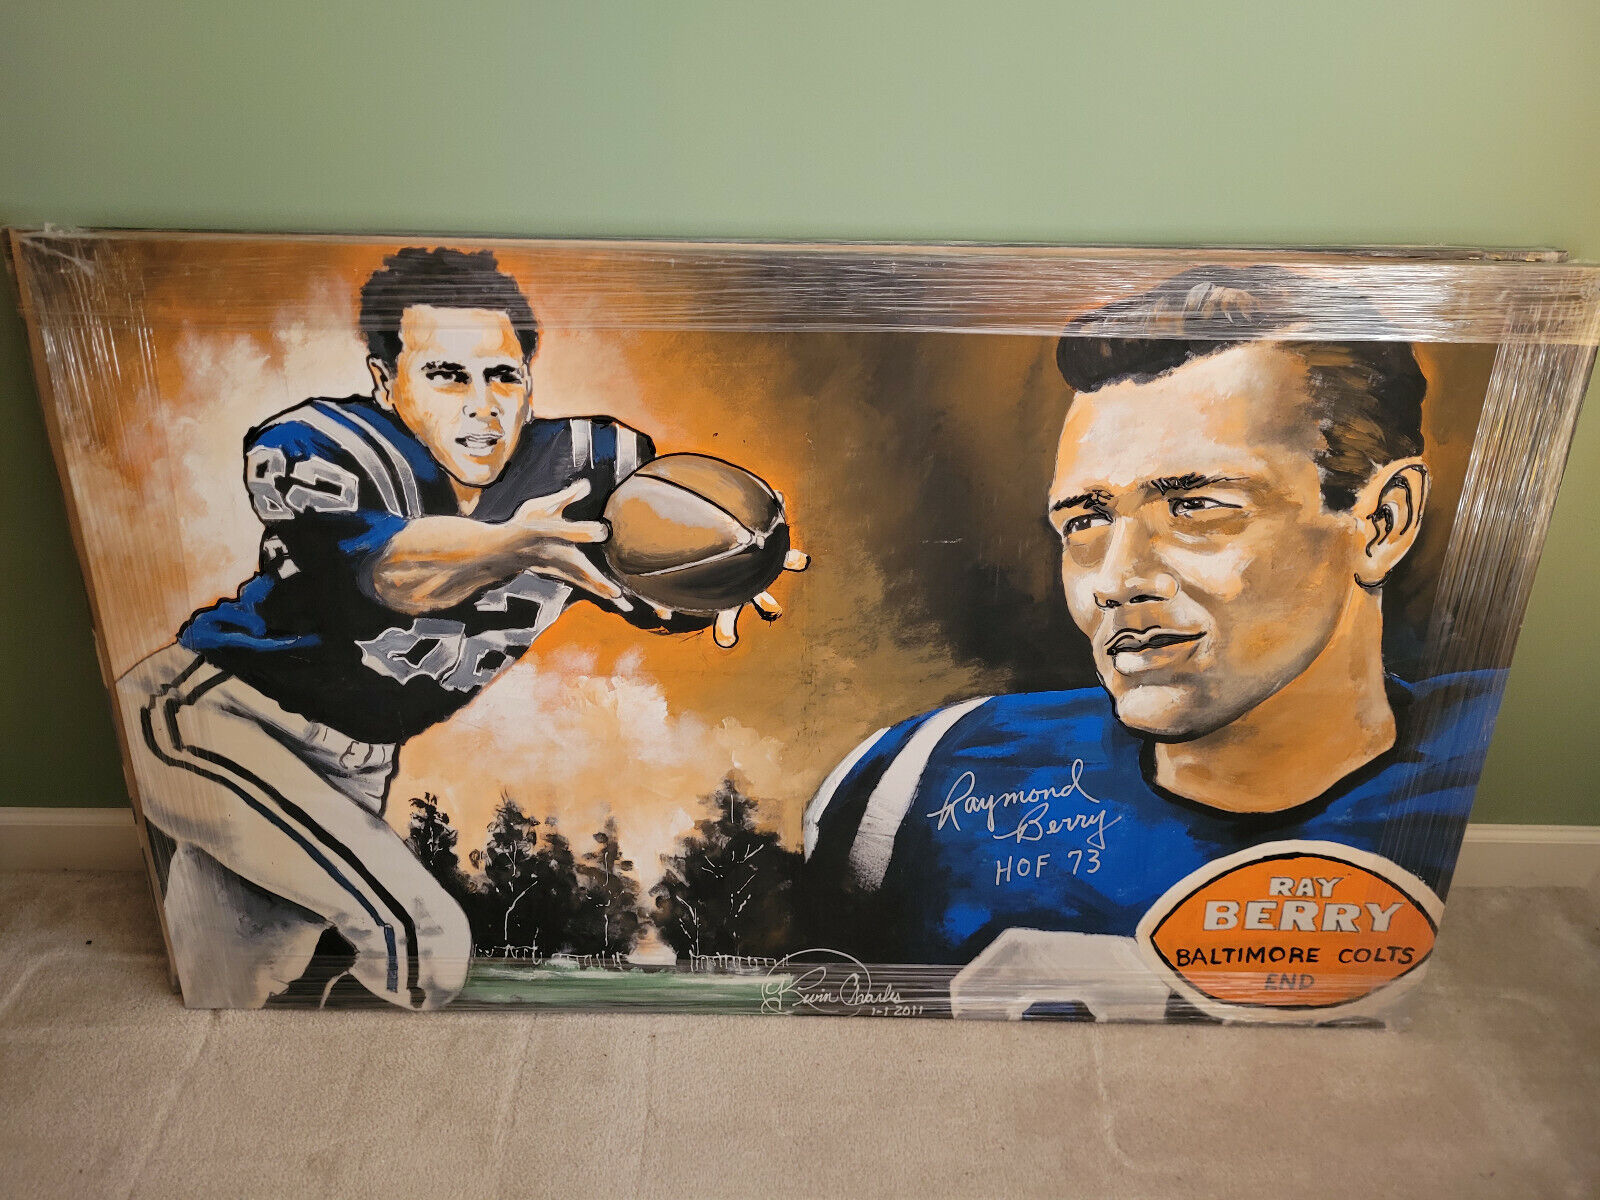 Baltimore Colts Raymond Berry HOF '73 Signed JSA Artist Portrait by Kevin Charles